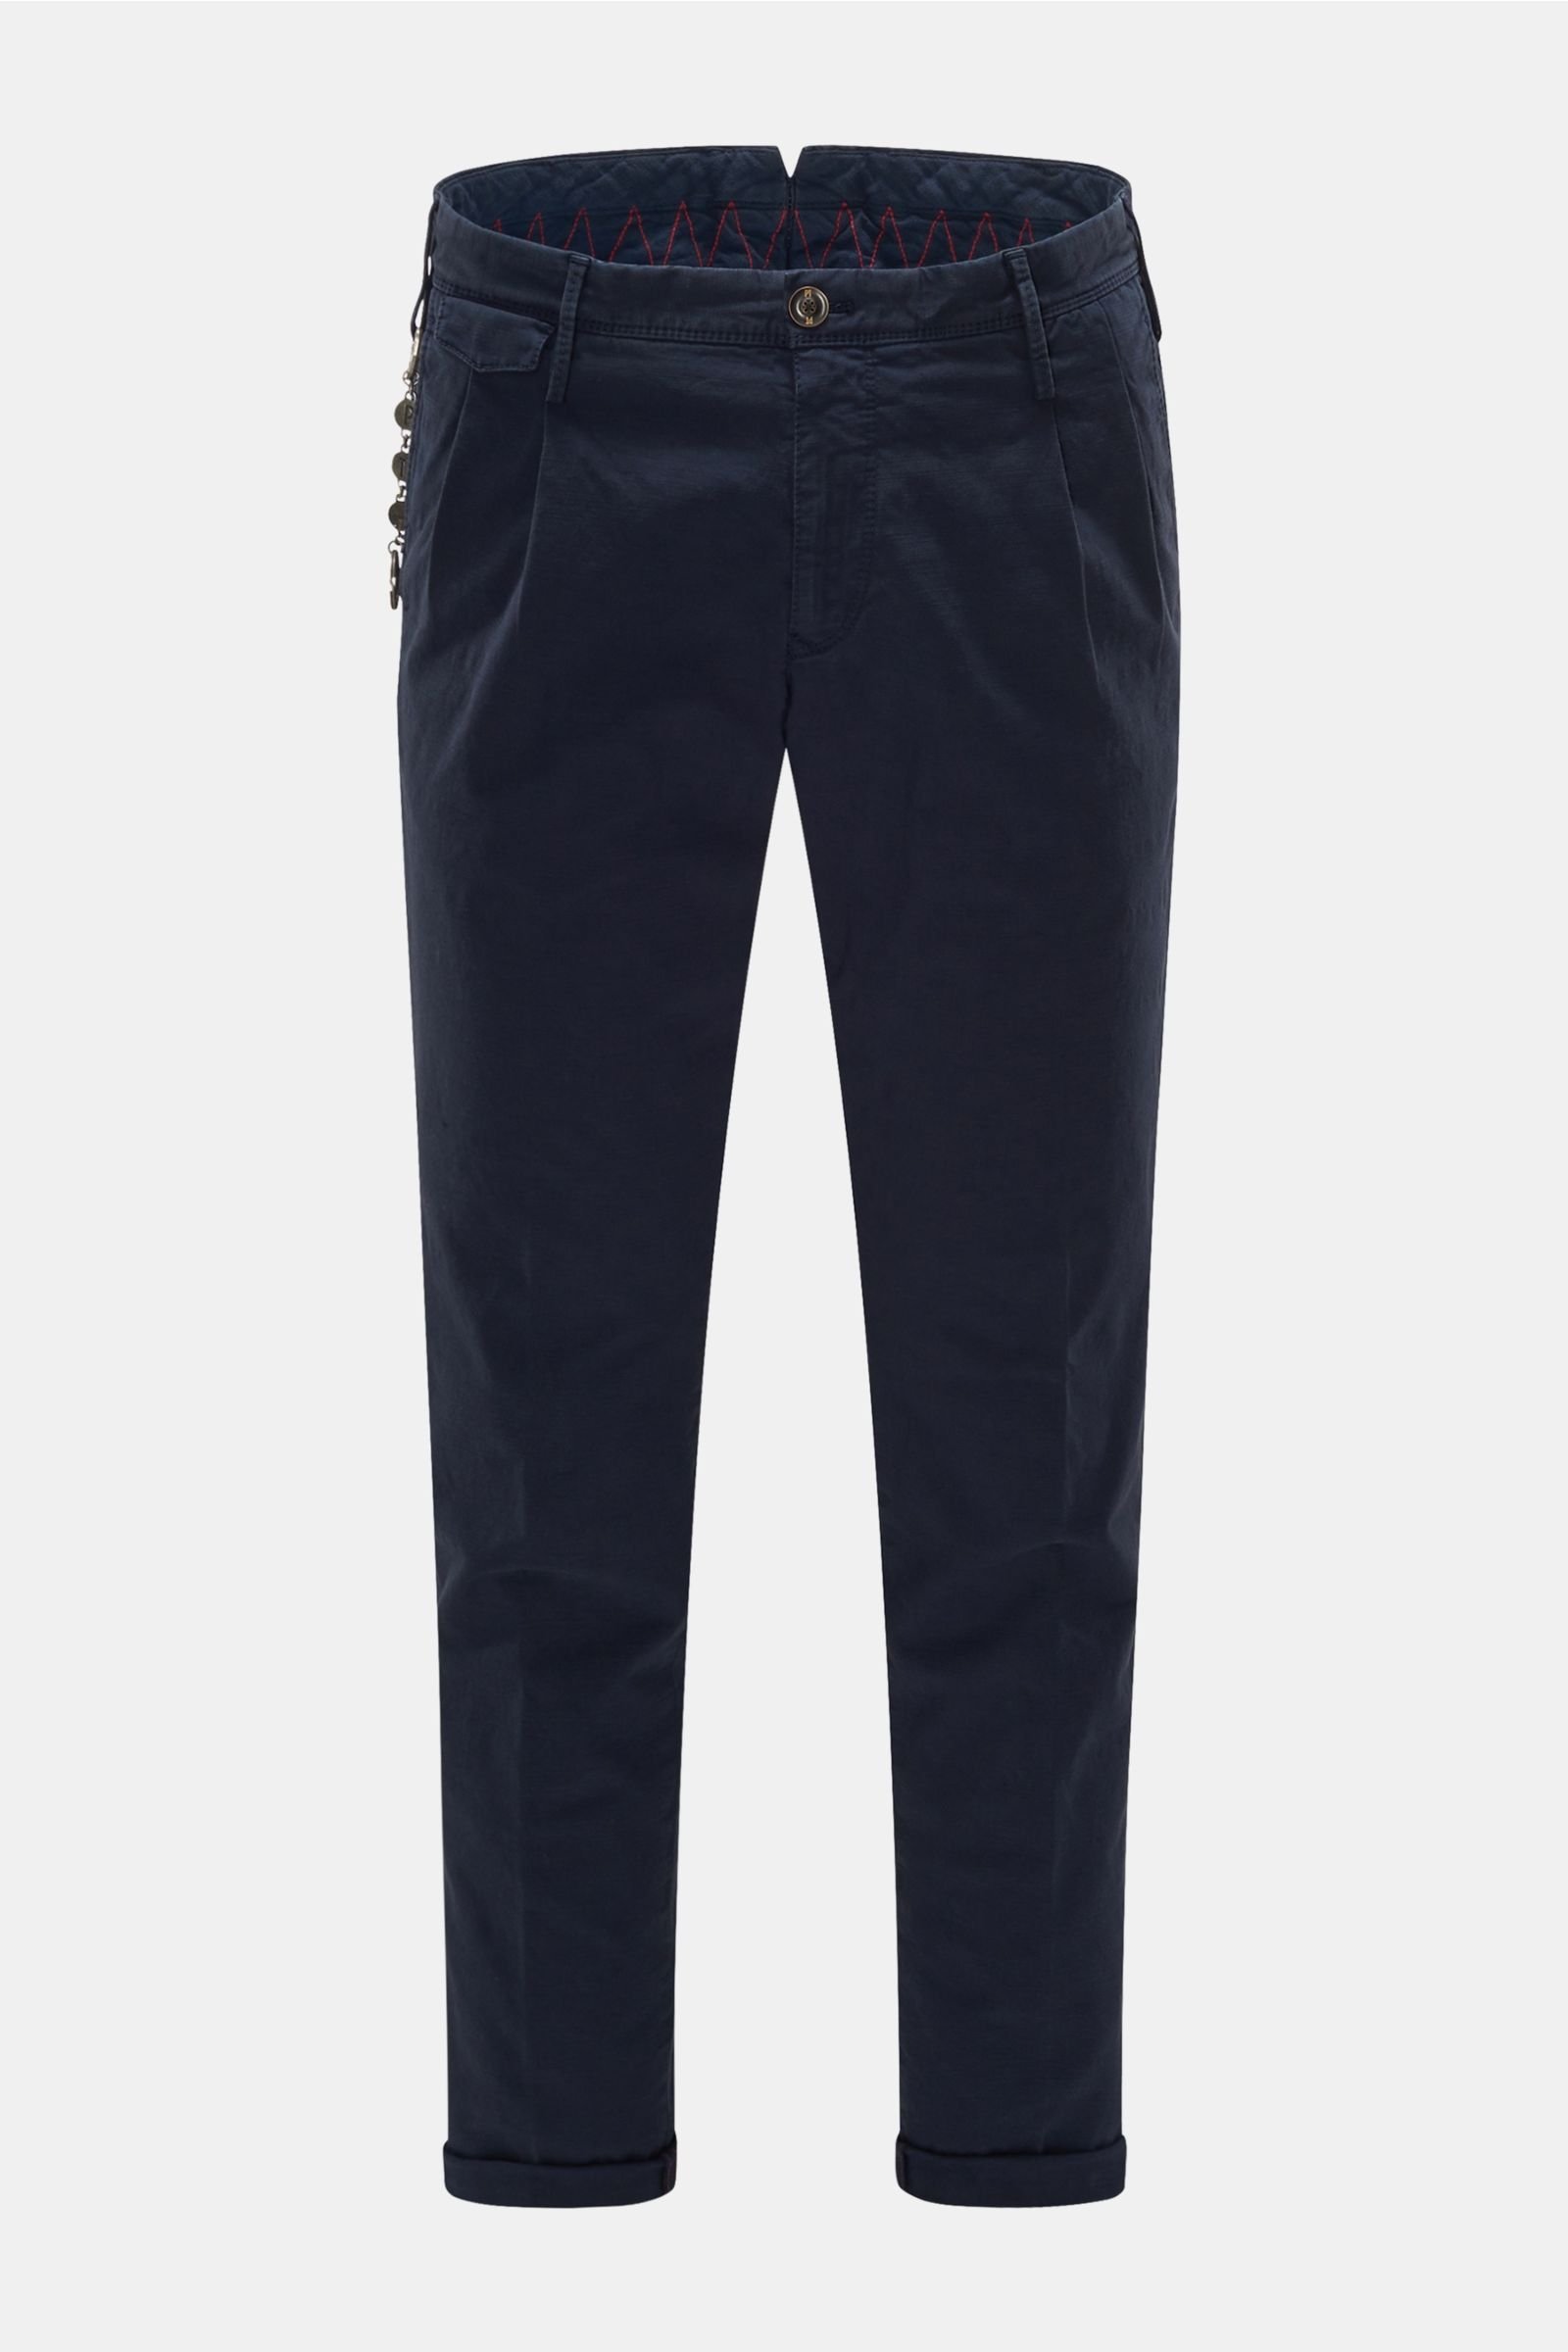 Cotton trousers 'Arial' navy